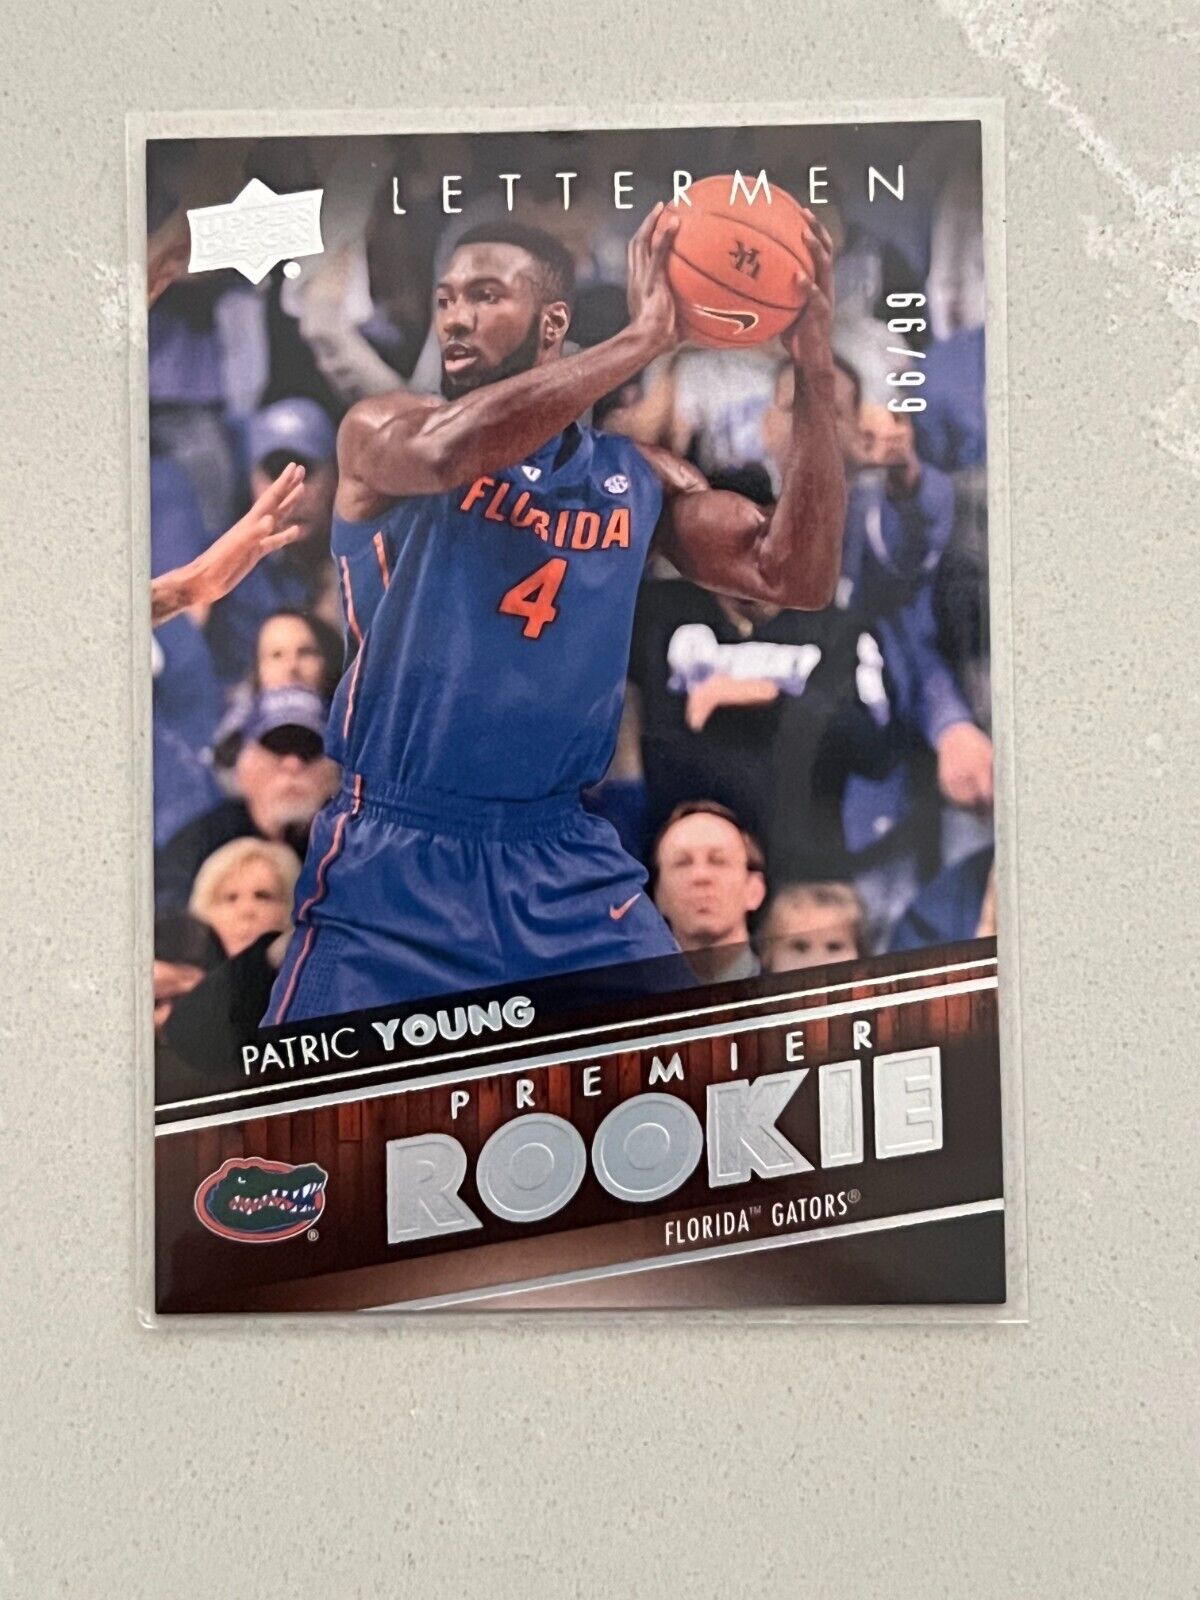 2014-15 Upper Deck Letterman Patric Young Silver Rookie Card (RC) #75 /99. rookie card picture